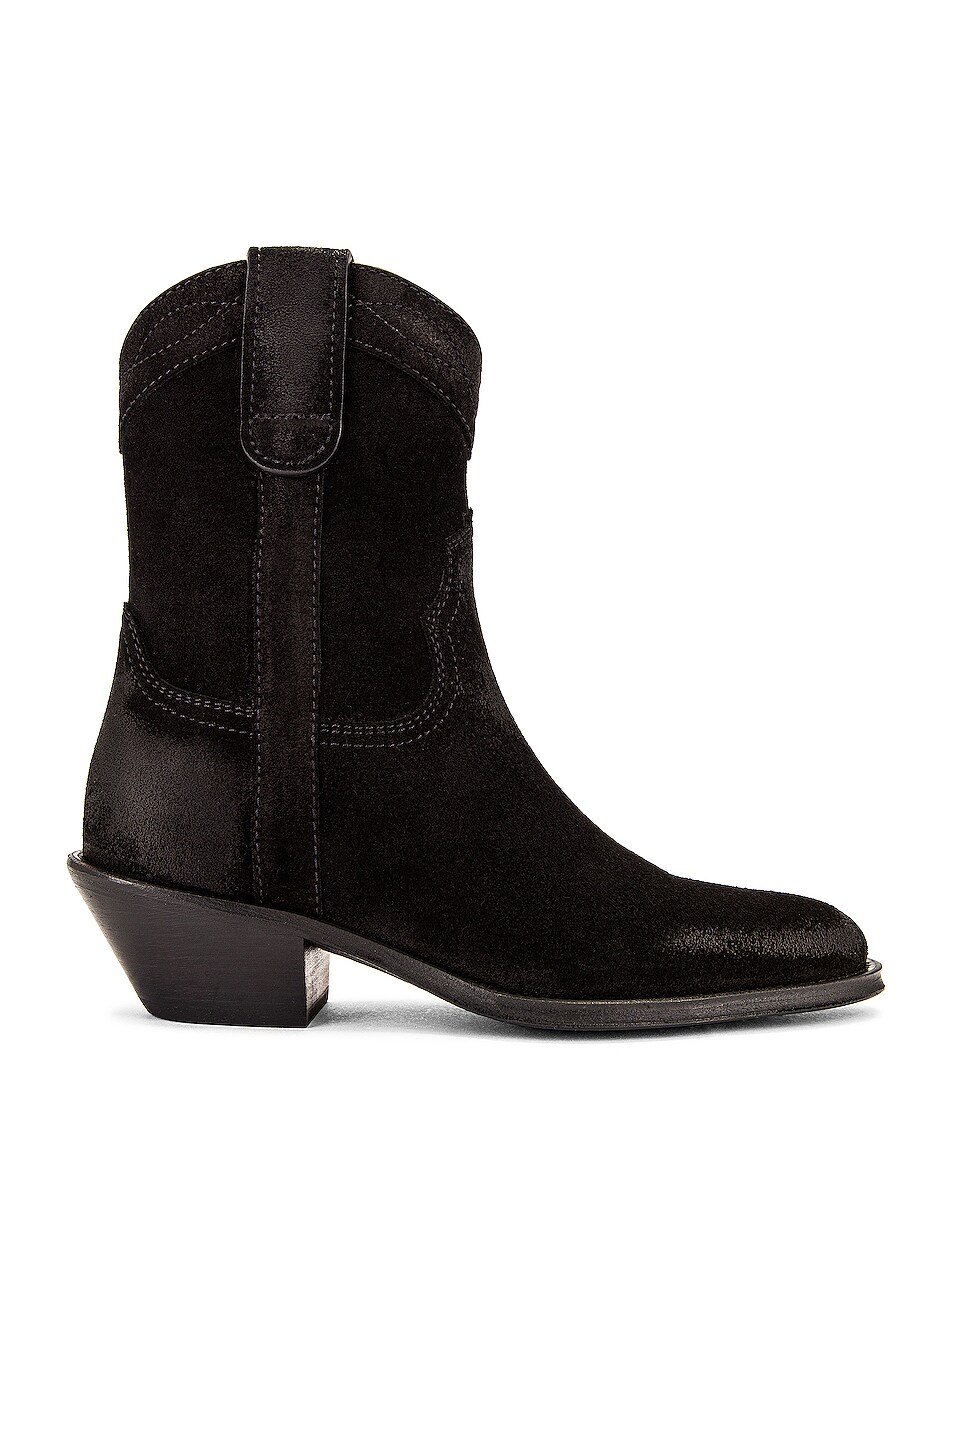 Image 1 of Saint Laurent Ratched Boots in Nero